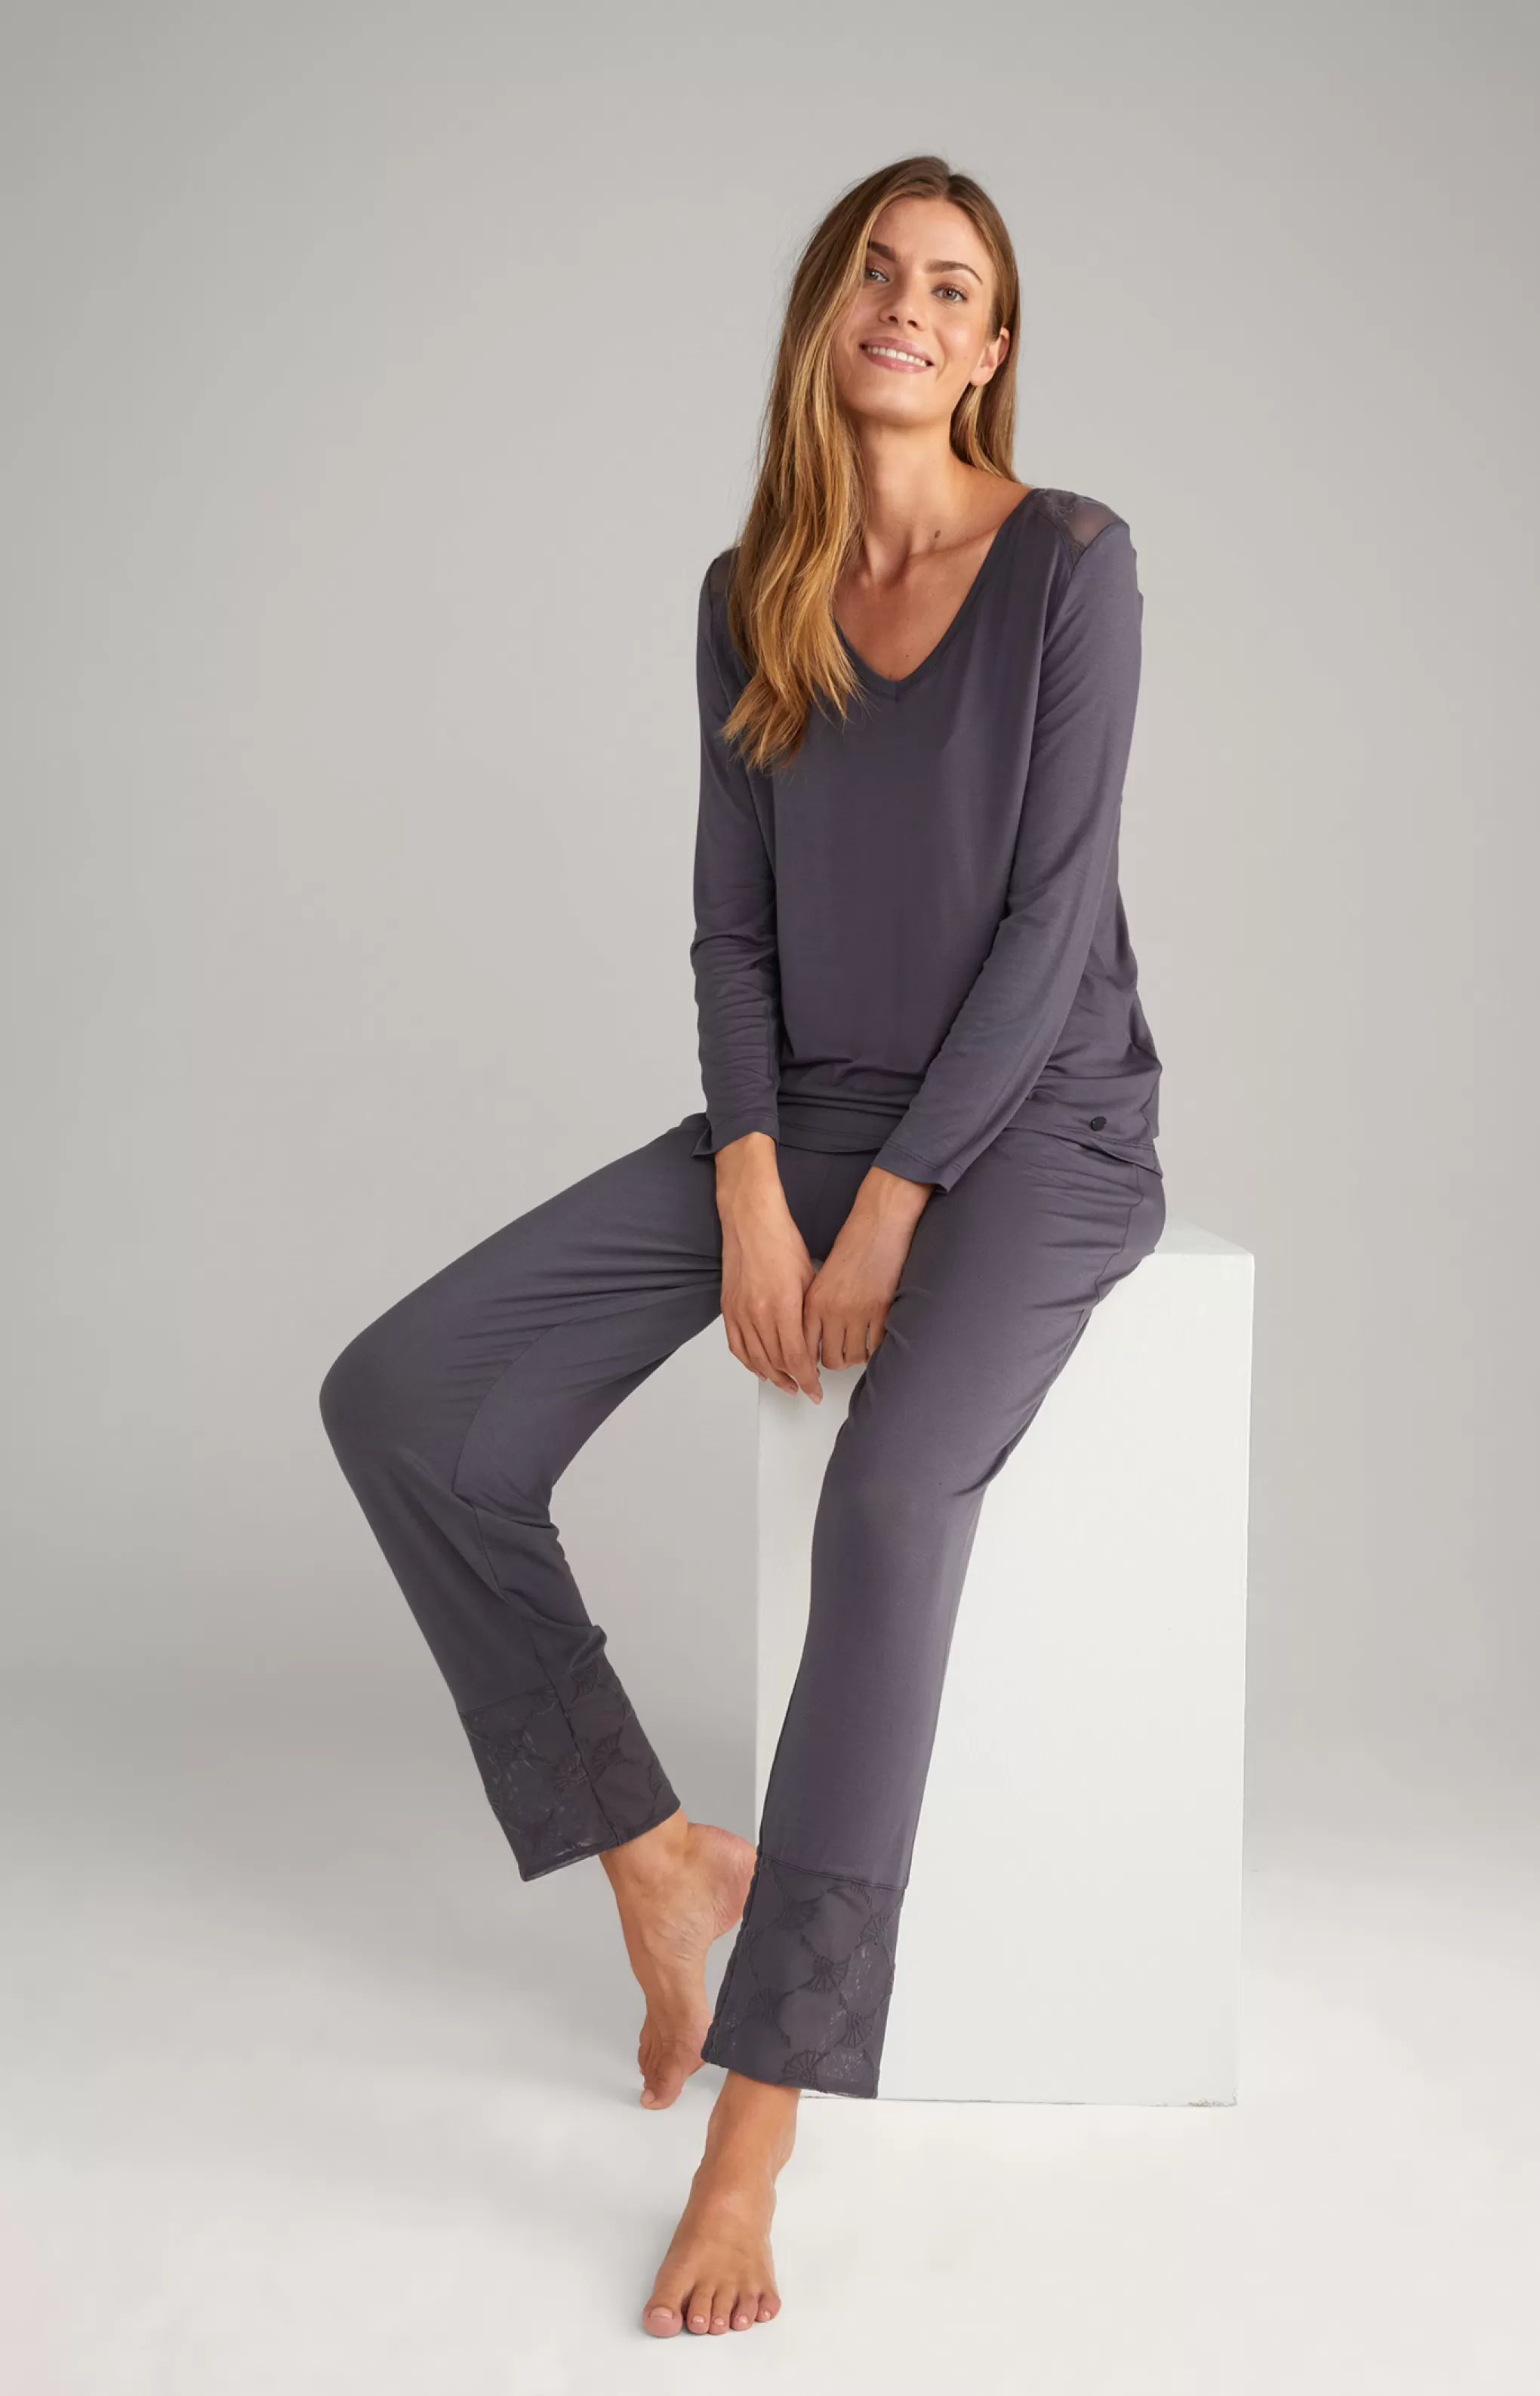 Loungewear & Nightwear*JOOP Loungewear & Nightwear Loungewear Trousers in